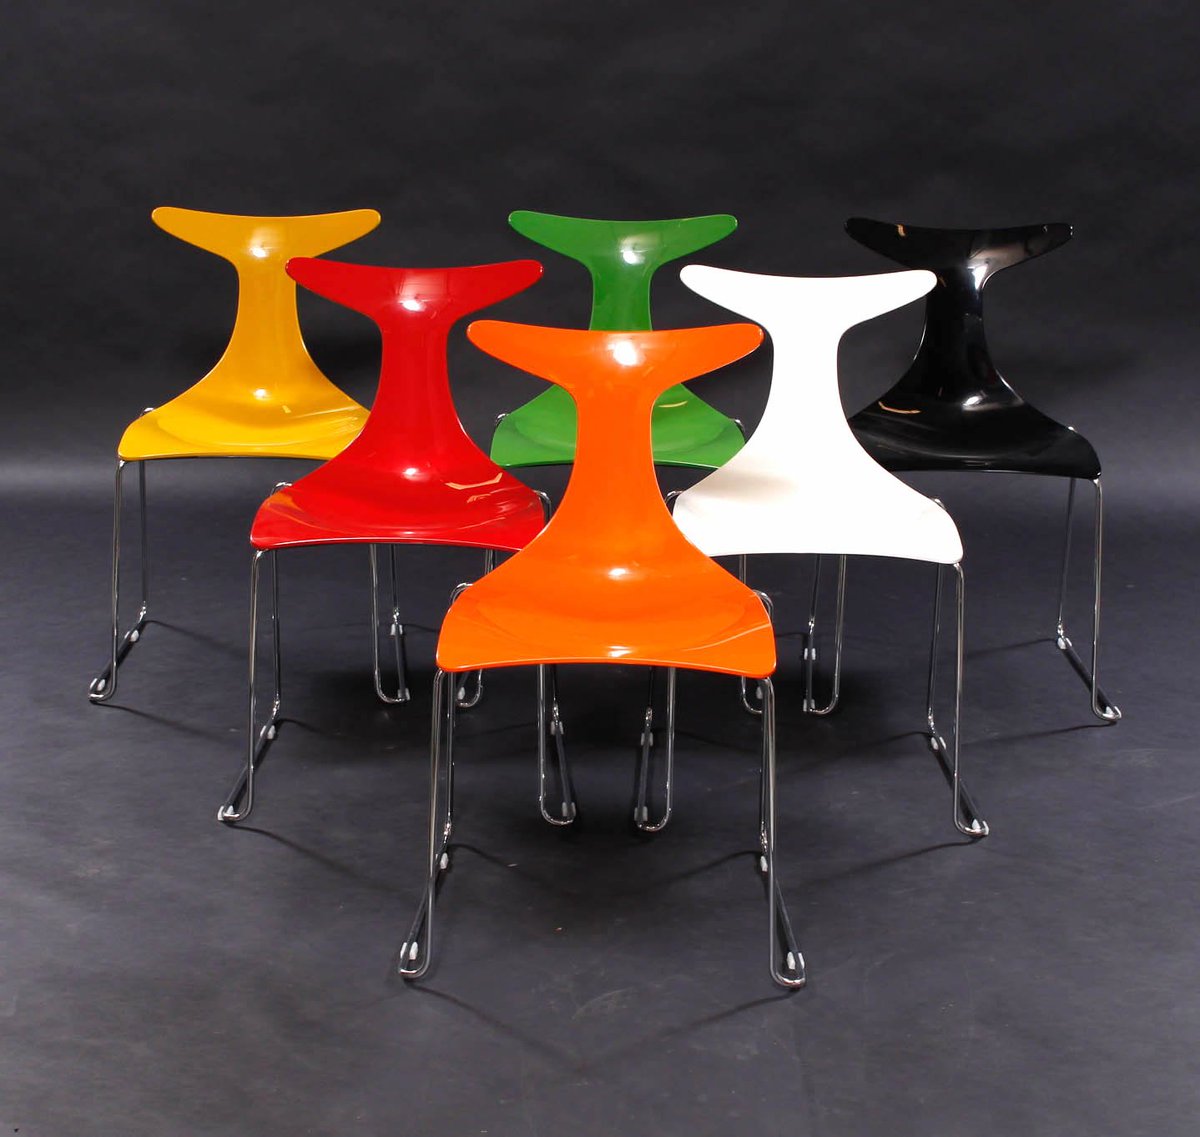 A little pop of color designed by Gino Carollo... set of six Delfy Lux chairs made by Kreaty of Italy.

 #midcentury #midcenturymodernfurniture #midcenturymodernism #midcenturymodern #midcenturydesign #design #vintage #vintagearmchairs #furniture #italianmodern #mcm #midmod